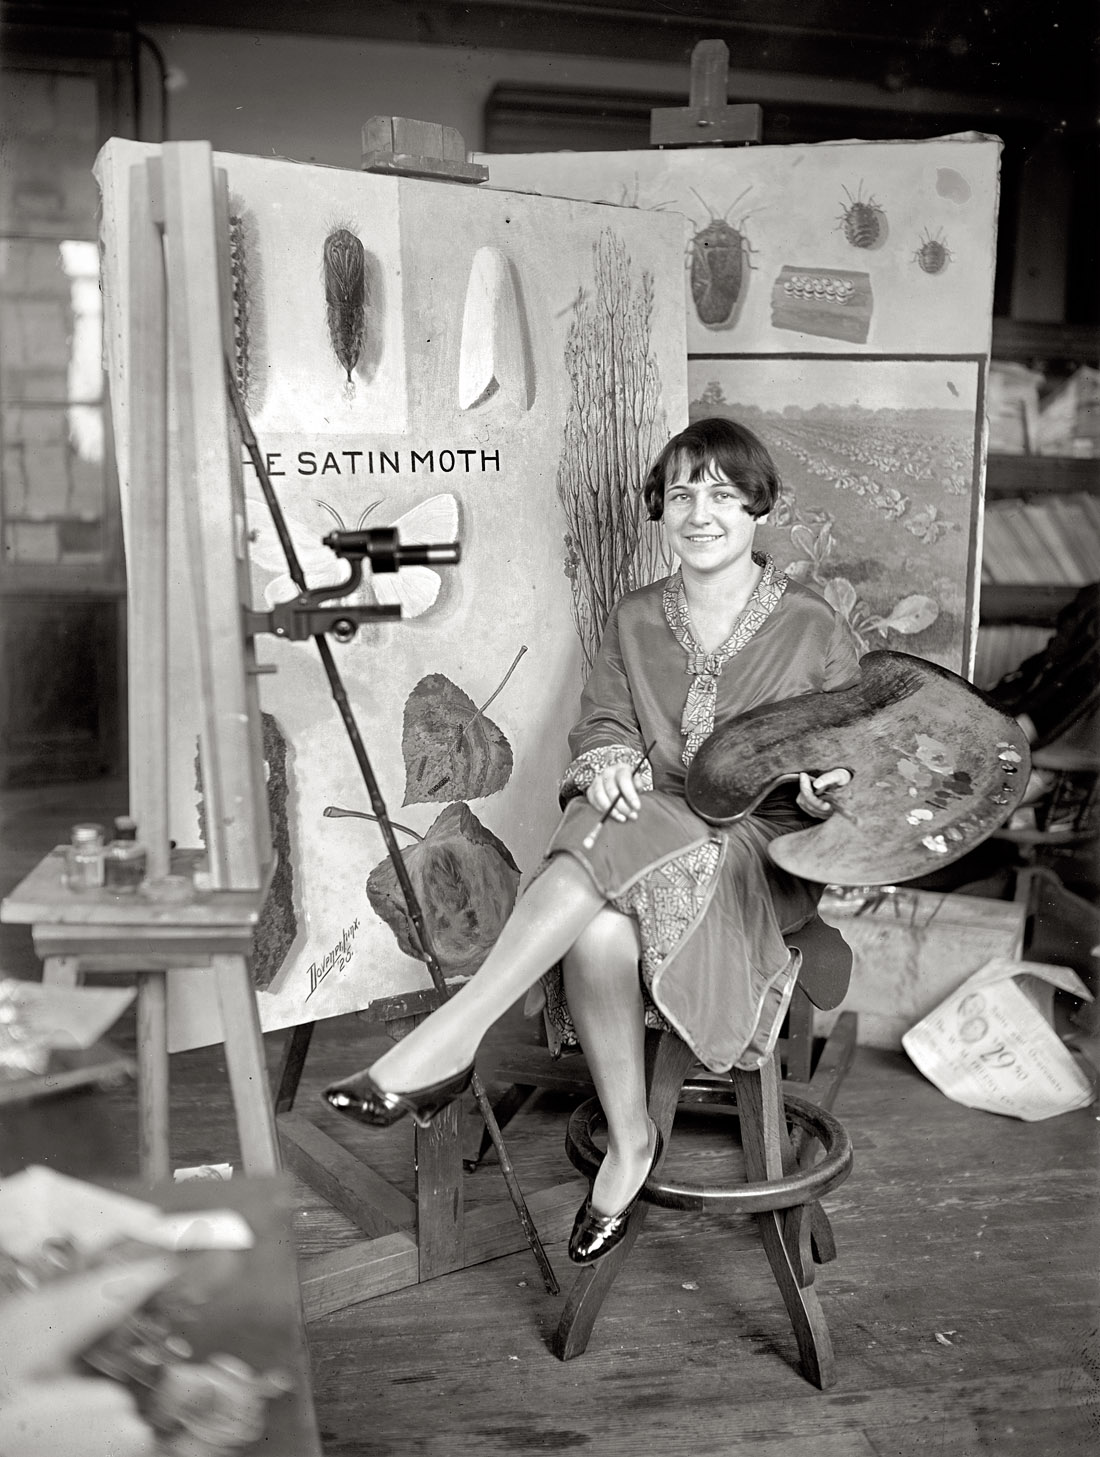 January 5, 1926. "Miss Mary C. Foley, artist at Department of Agriculture." National Photo Company Collection glass negative. View full size.